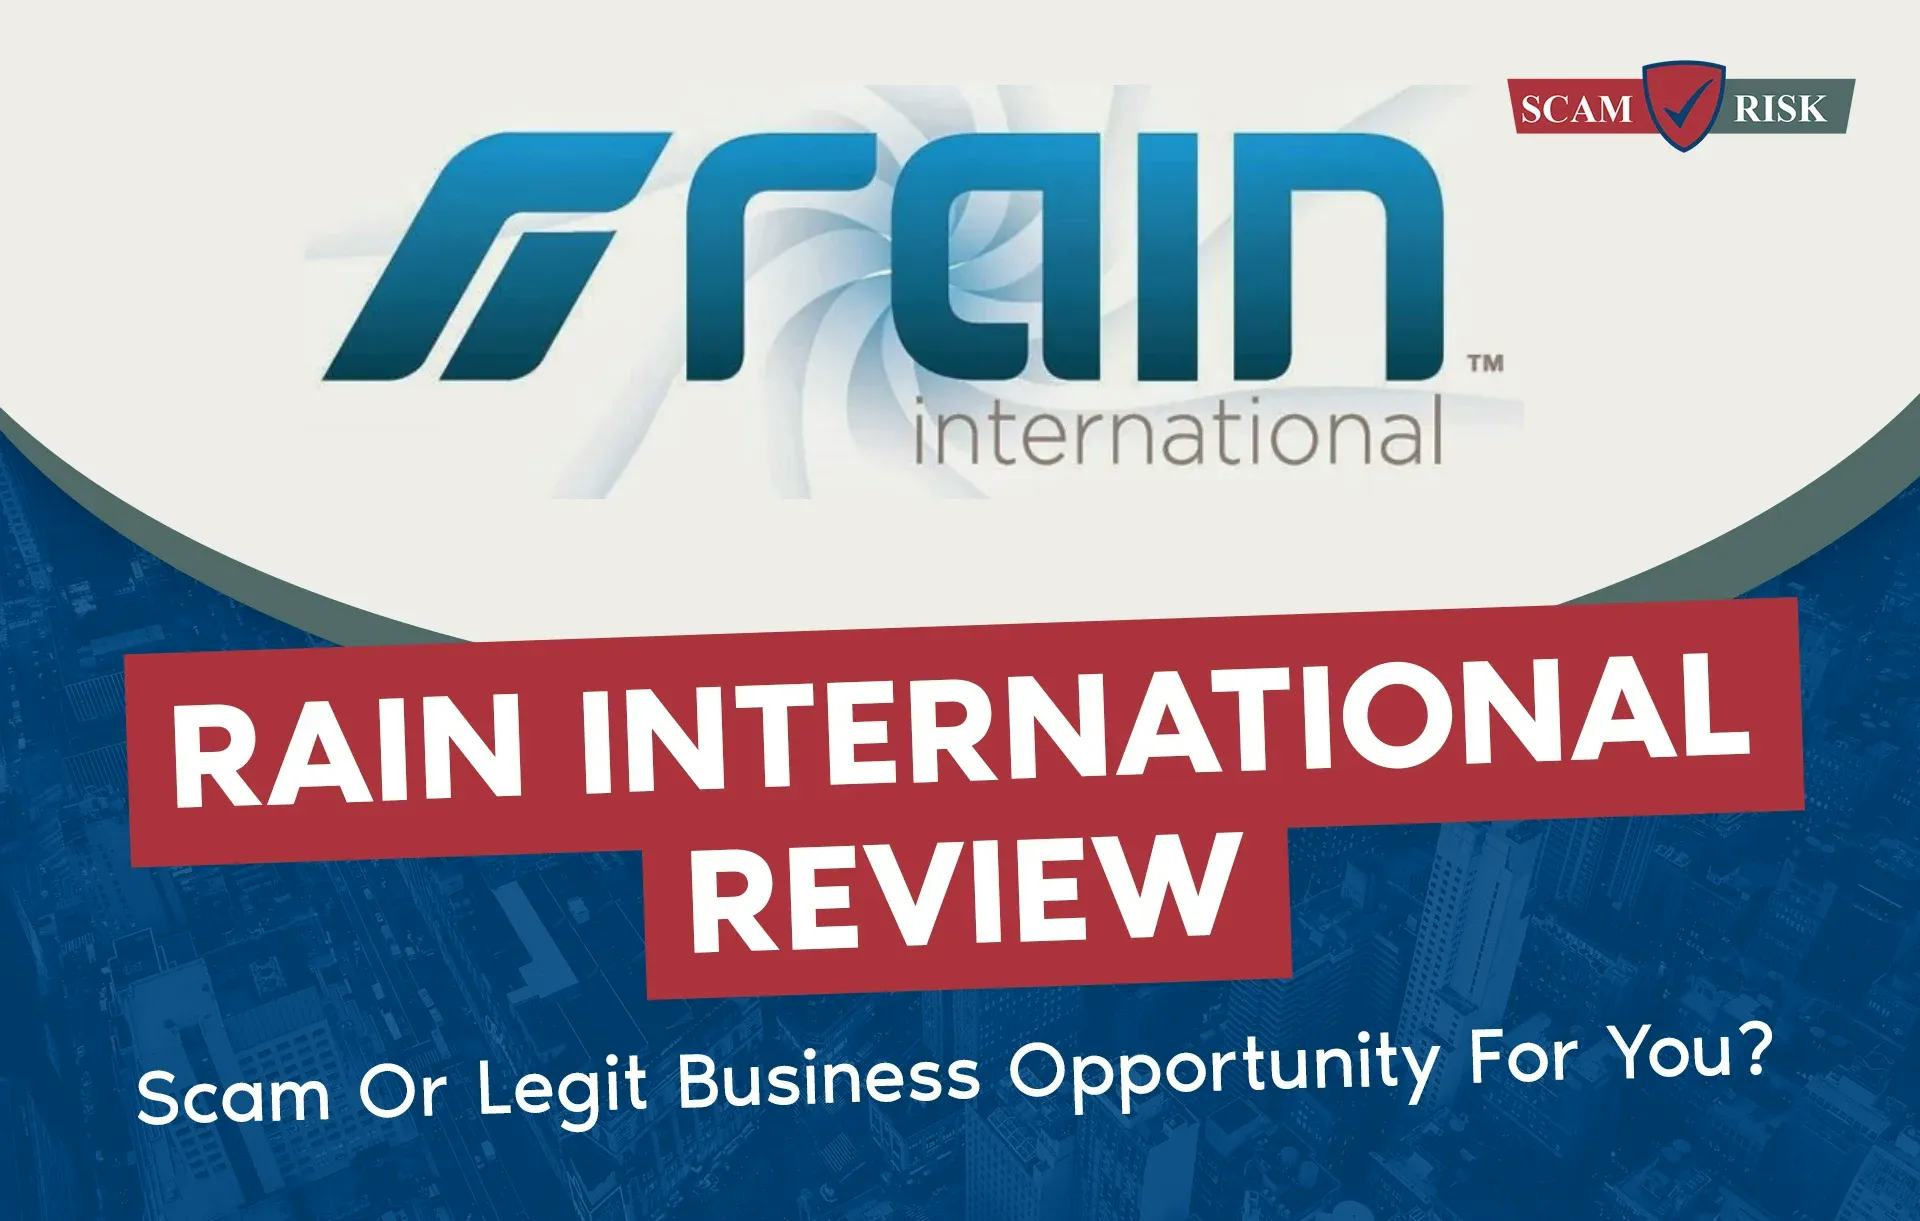 Rain International Review: Scam Or Legit Business Opportunity For You? ([year] Update)